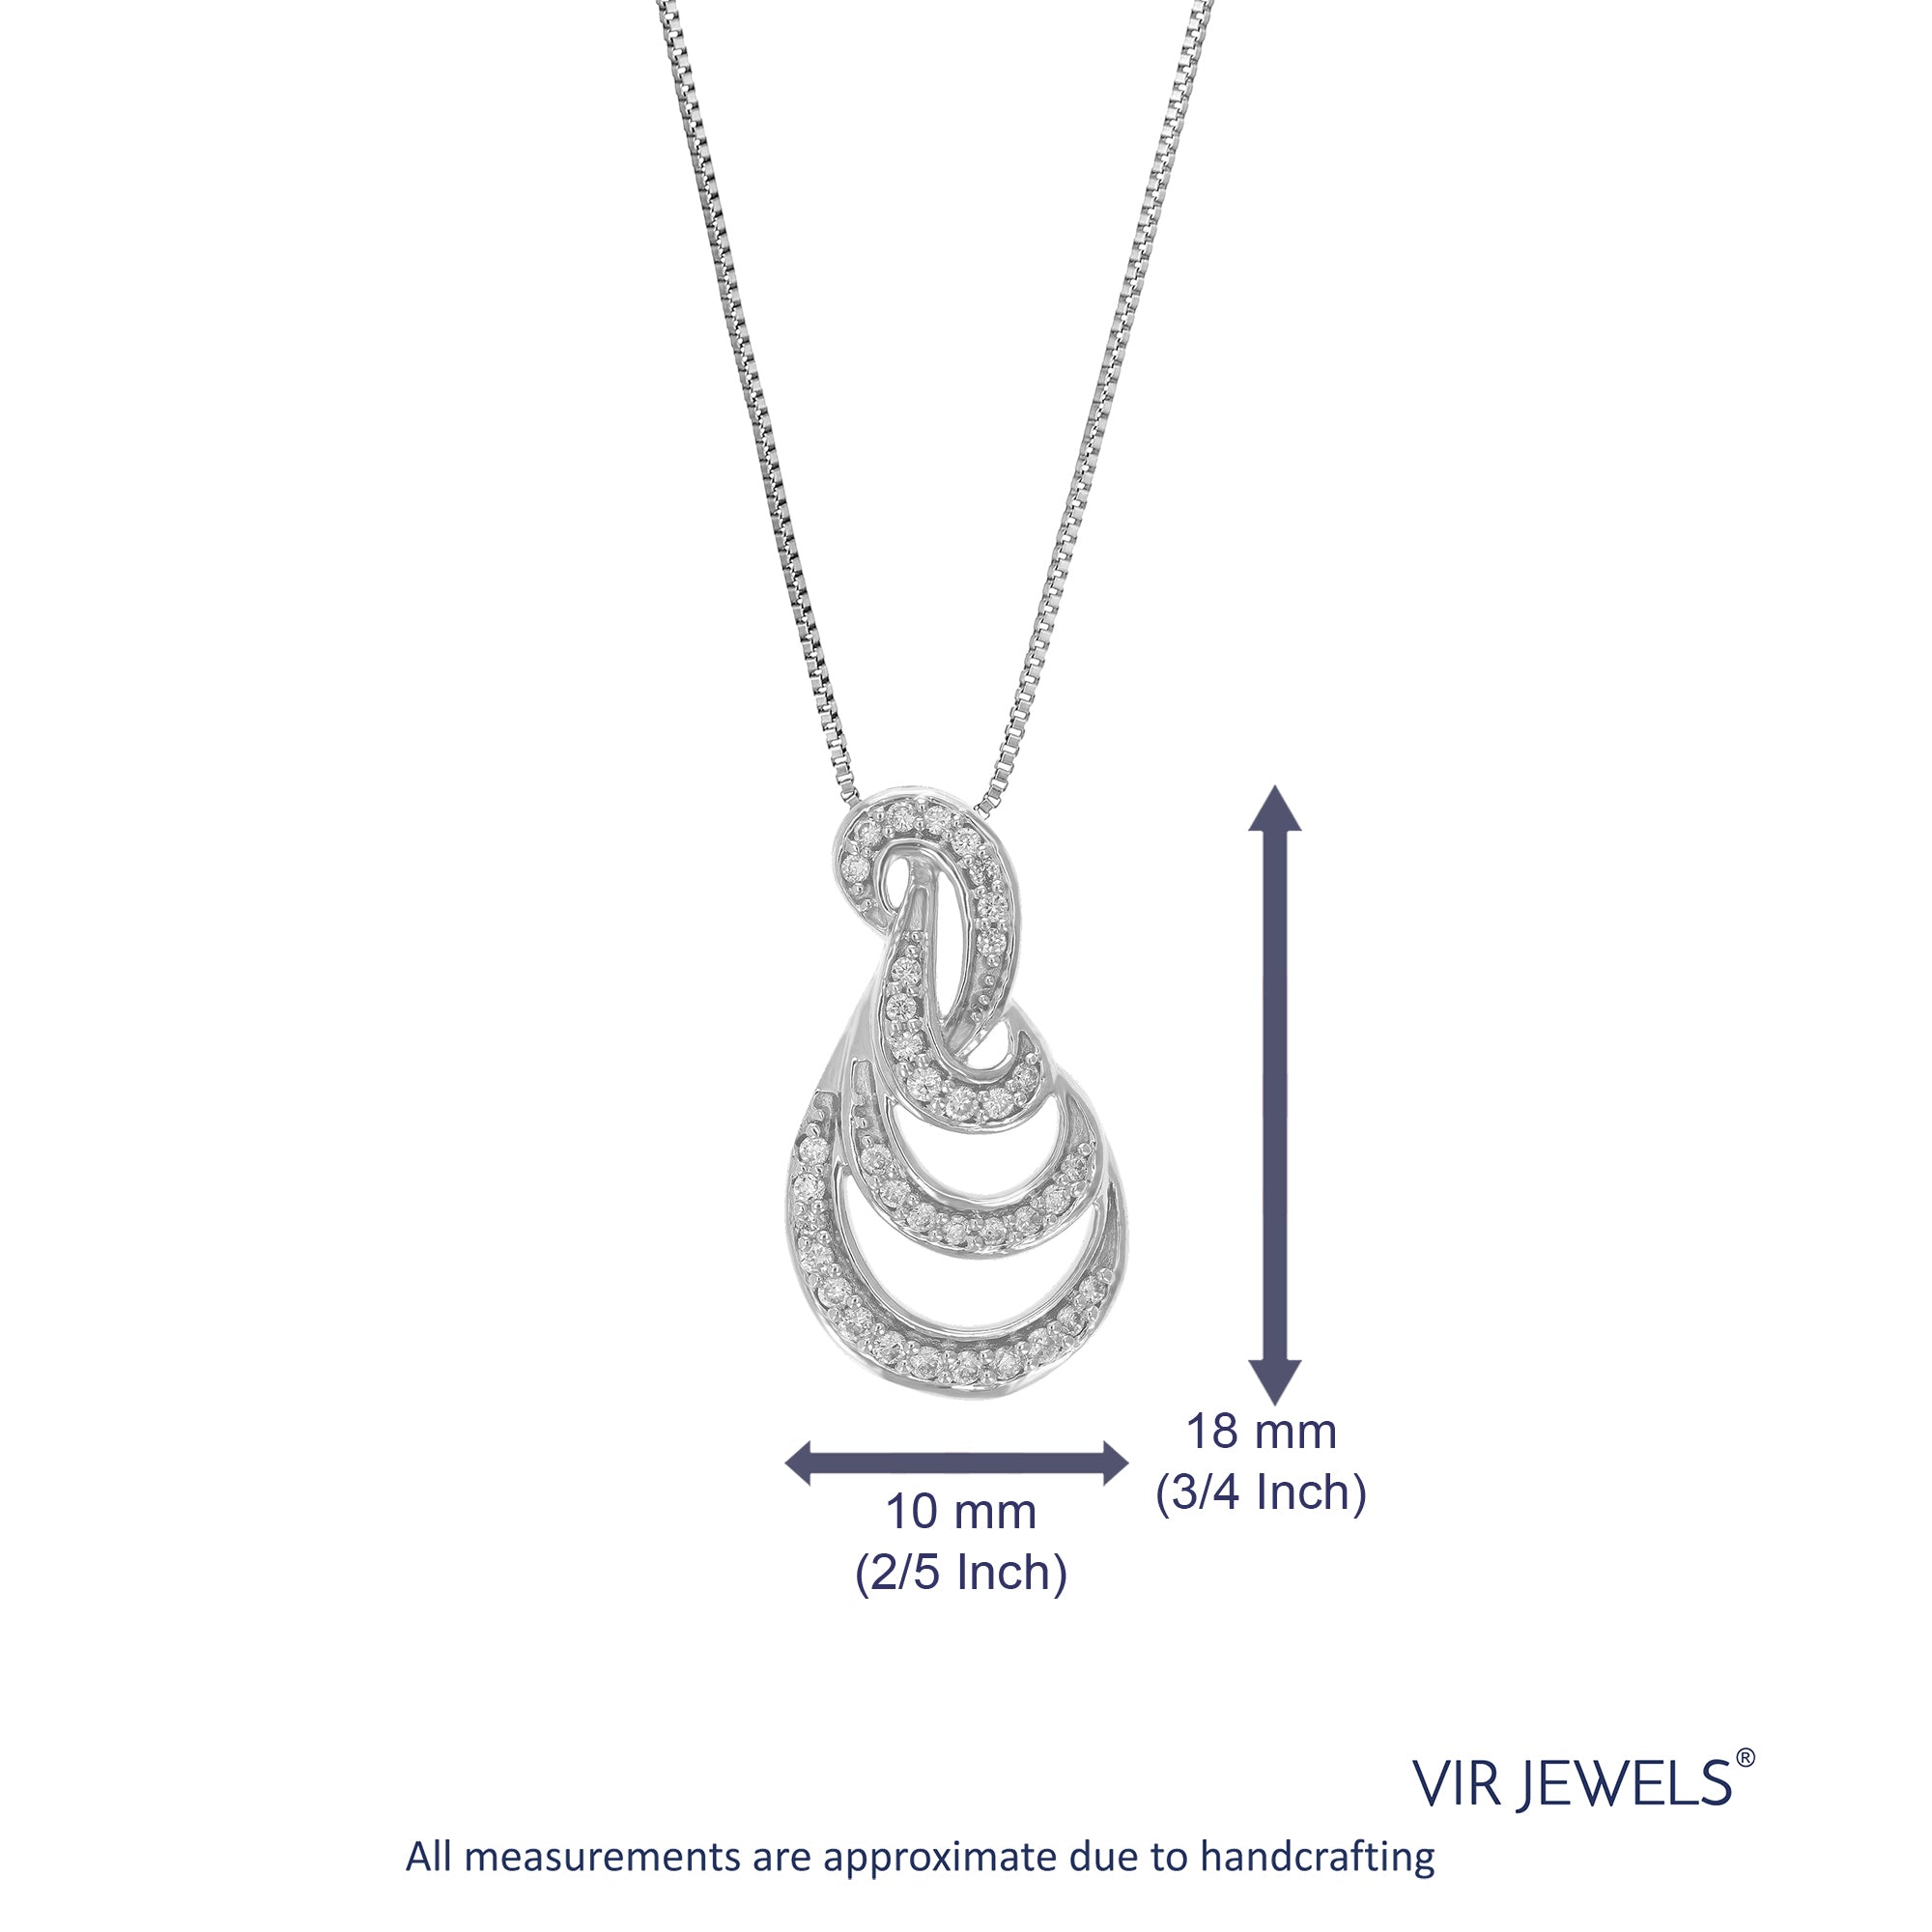 1/6 cttw Diamond Pendant Necklace for Women, Lab Grown Diamond Swirl Pendant Necklace in .925 Sterling Silver with Chain, Size 3/4 Inch